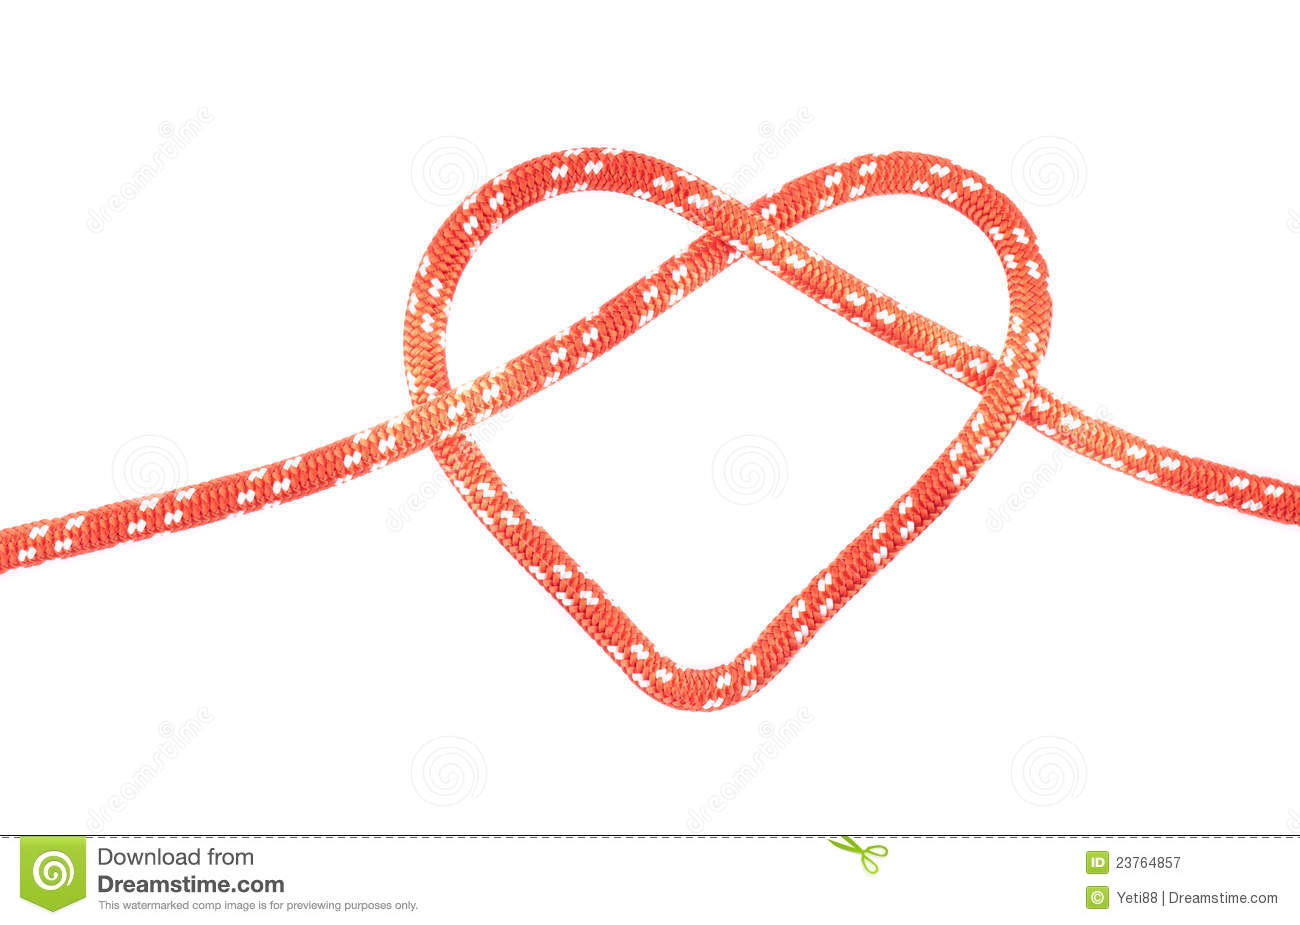 Heart Knot Royalty Free Stock Photography   Image  23764857